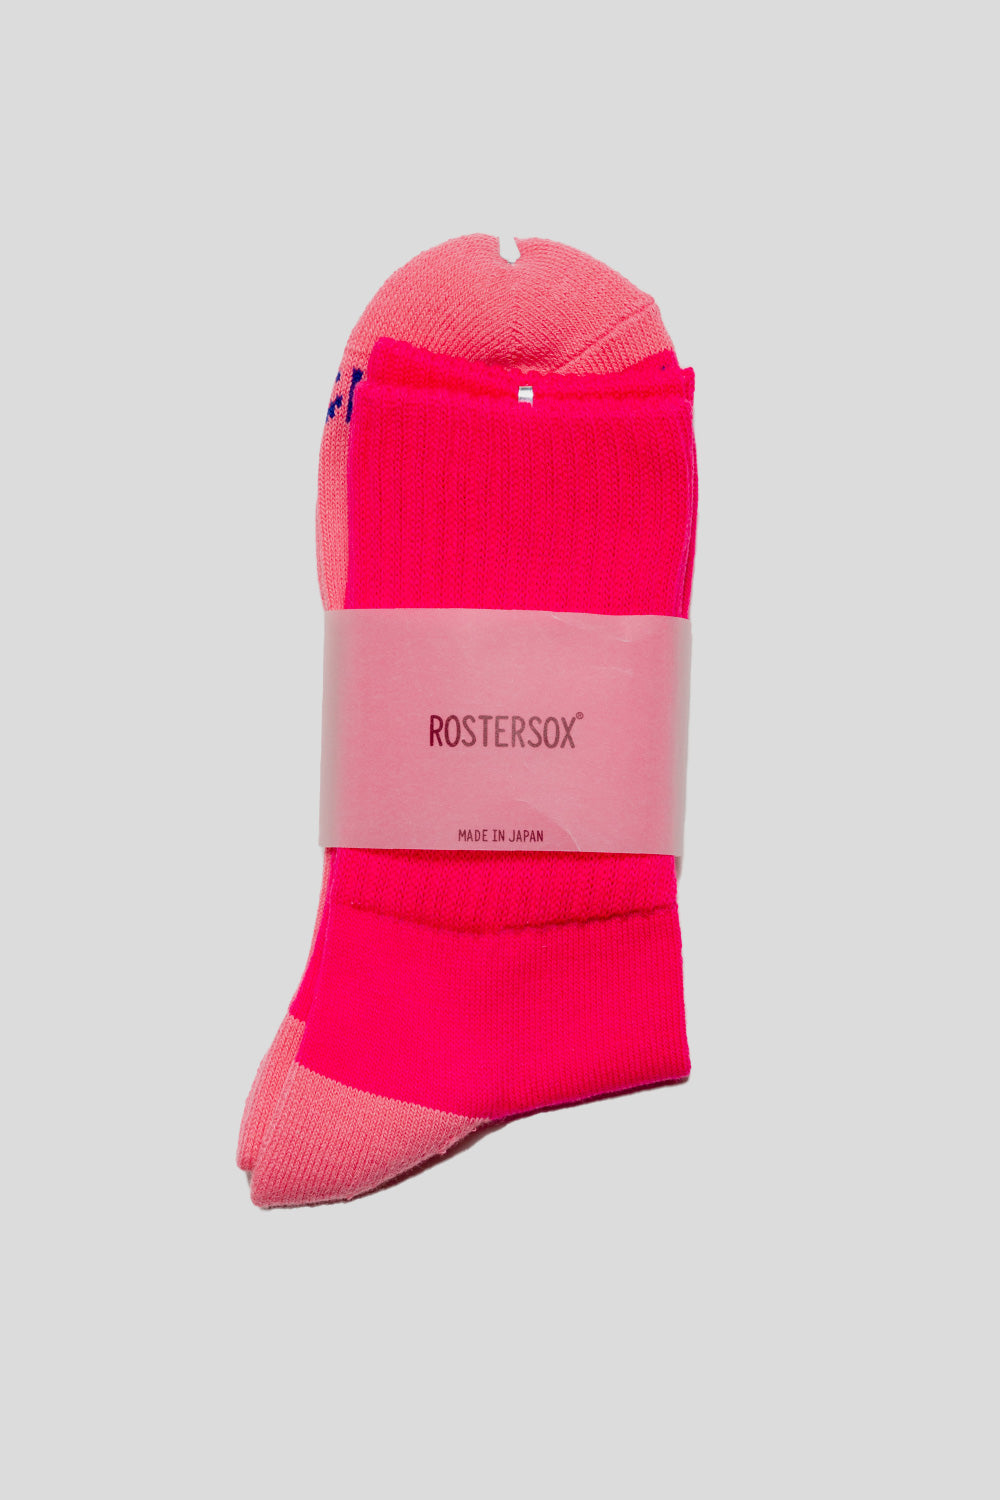 Rostersox Neo Socks in Pink